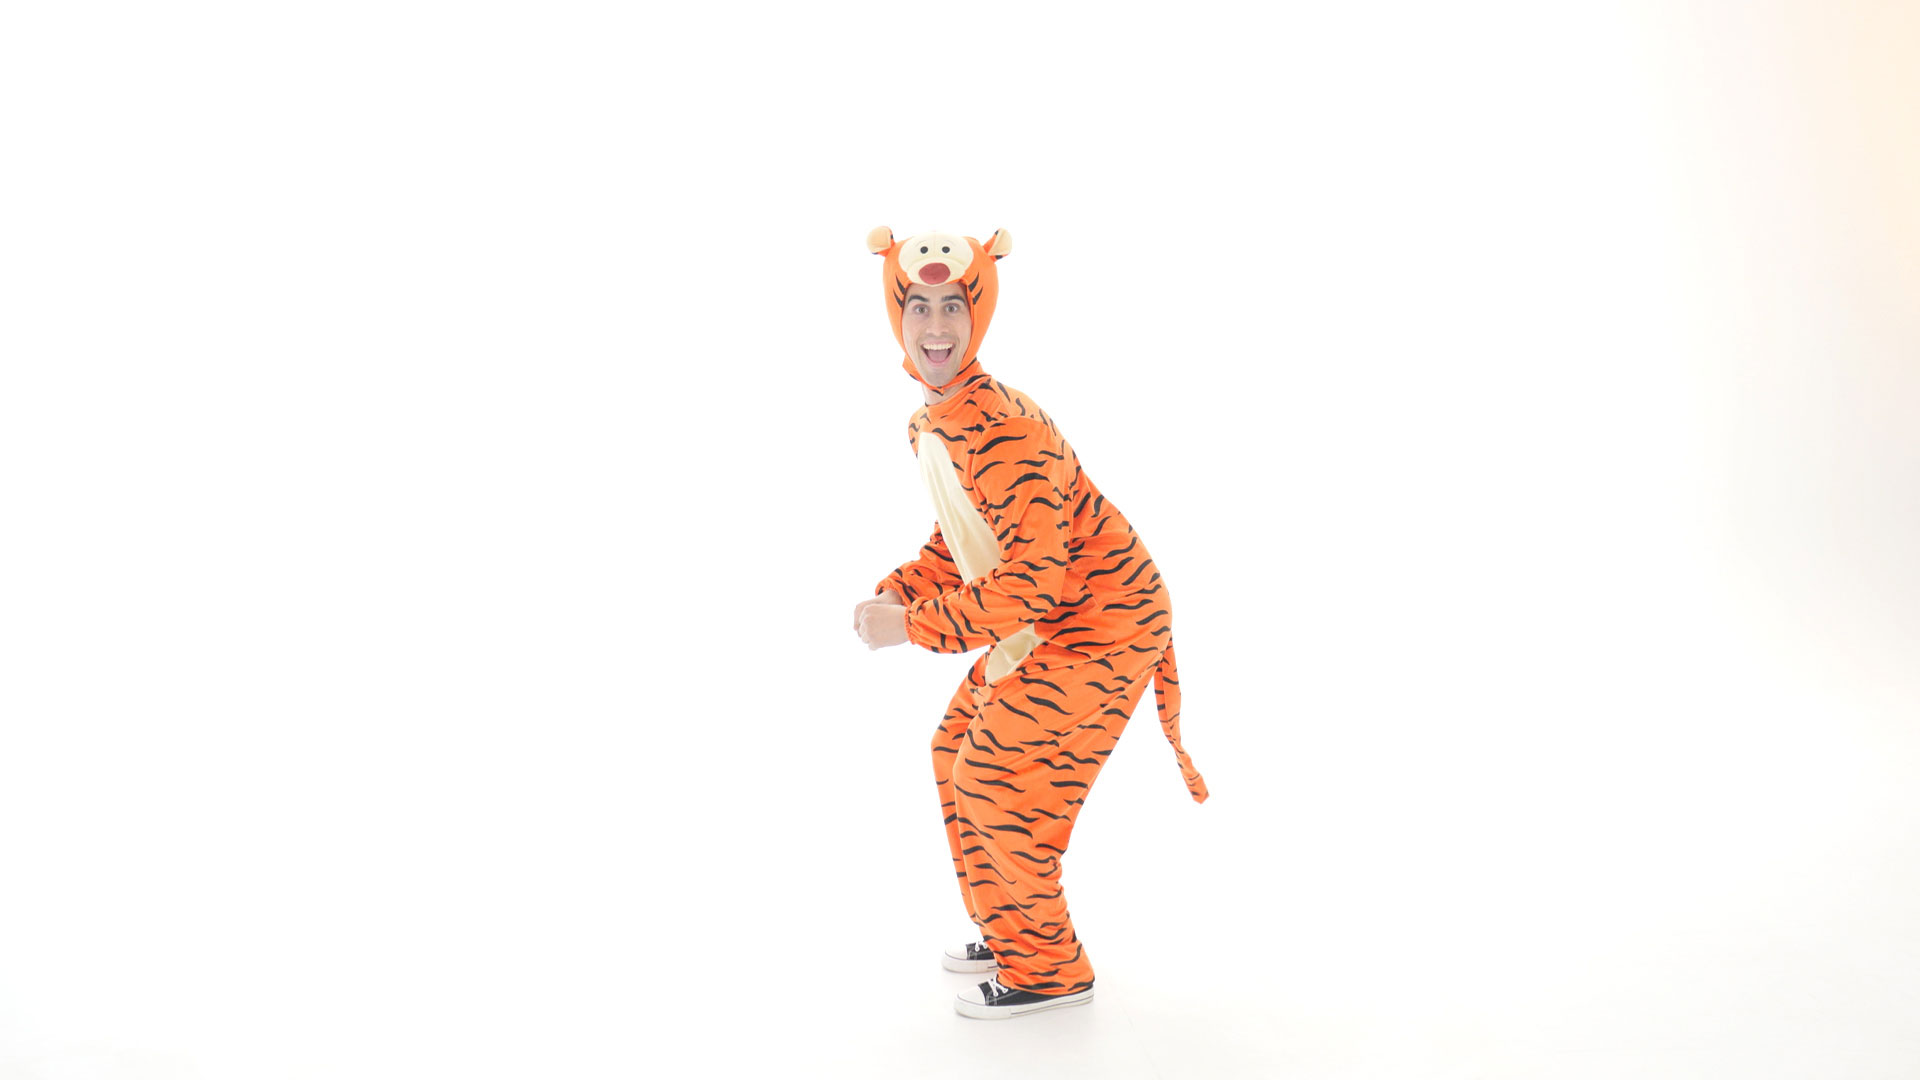 Bounce around the 100 acre woods in this deluxe adult Tigger costume.